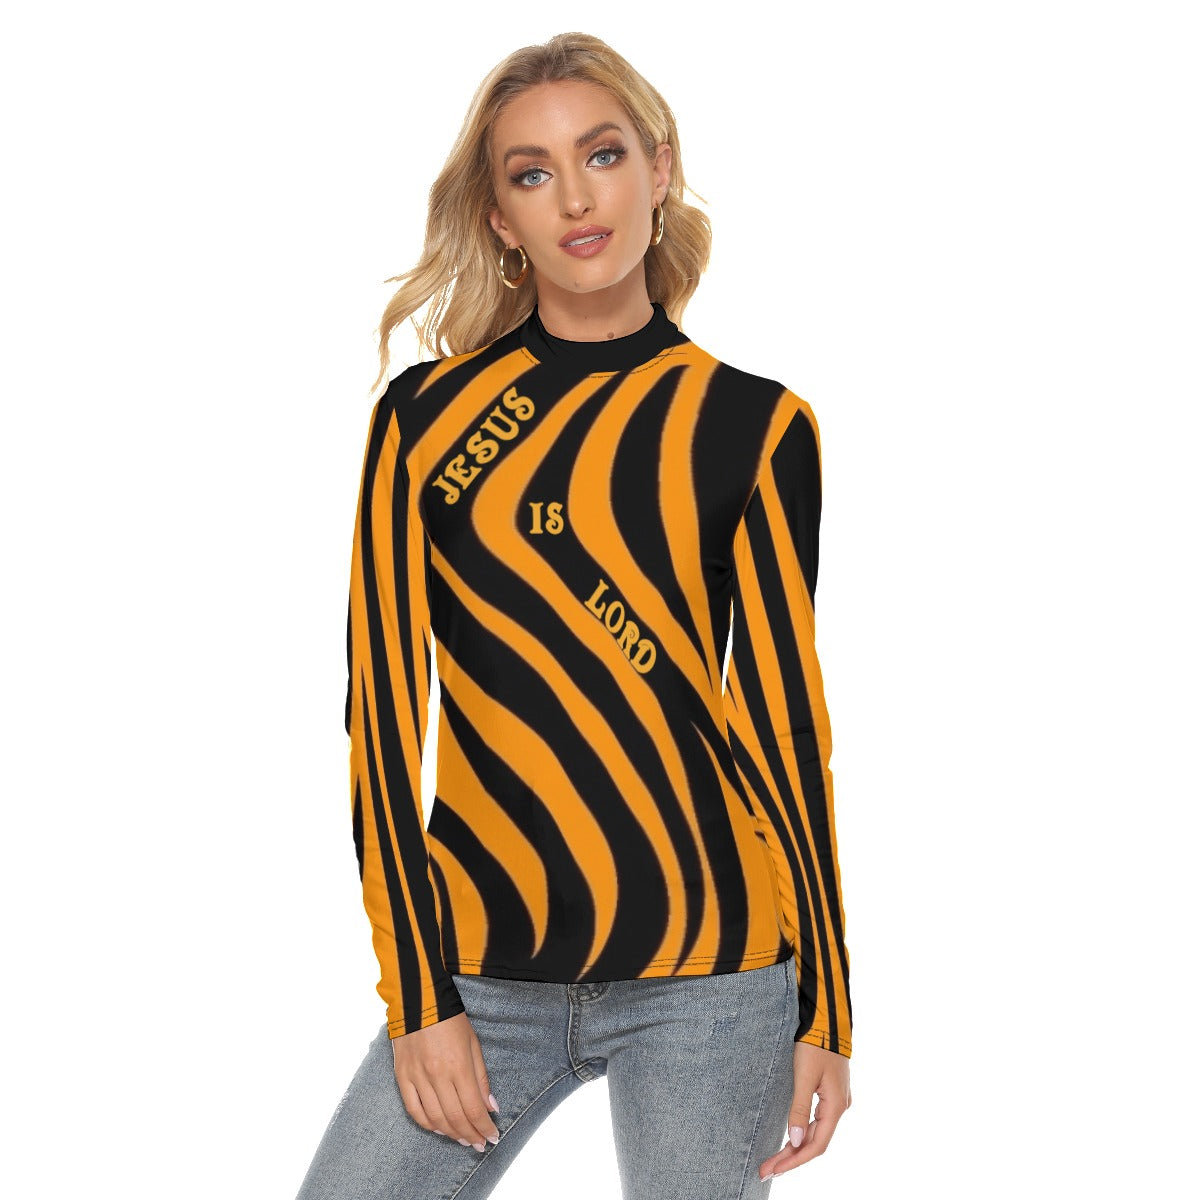 All Over Print Women's Stretchable Turtleneck Top